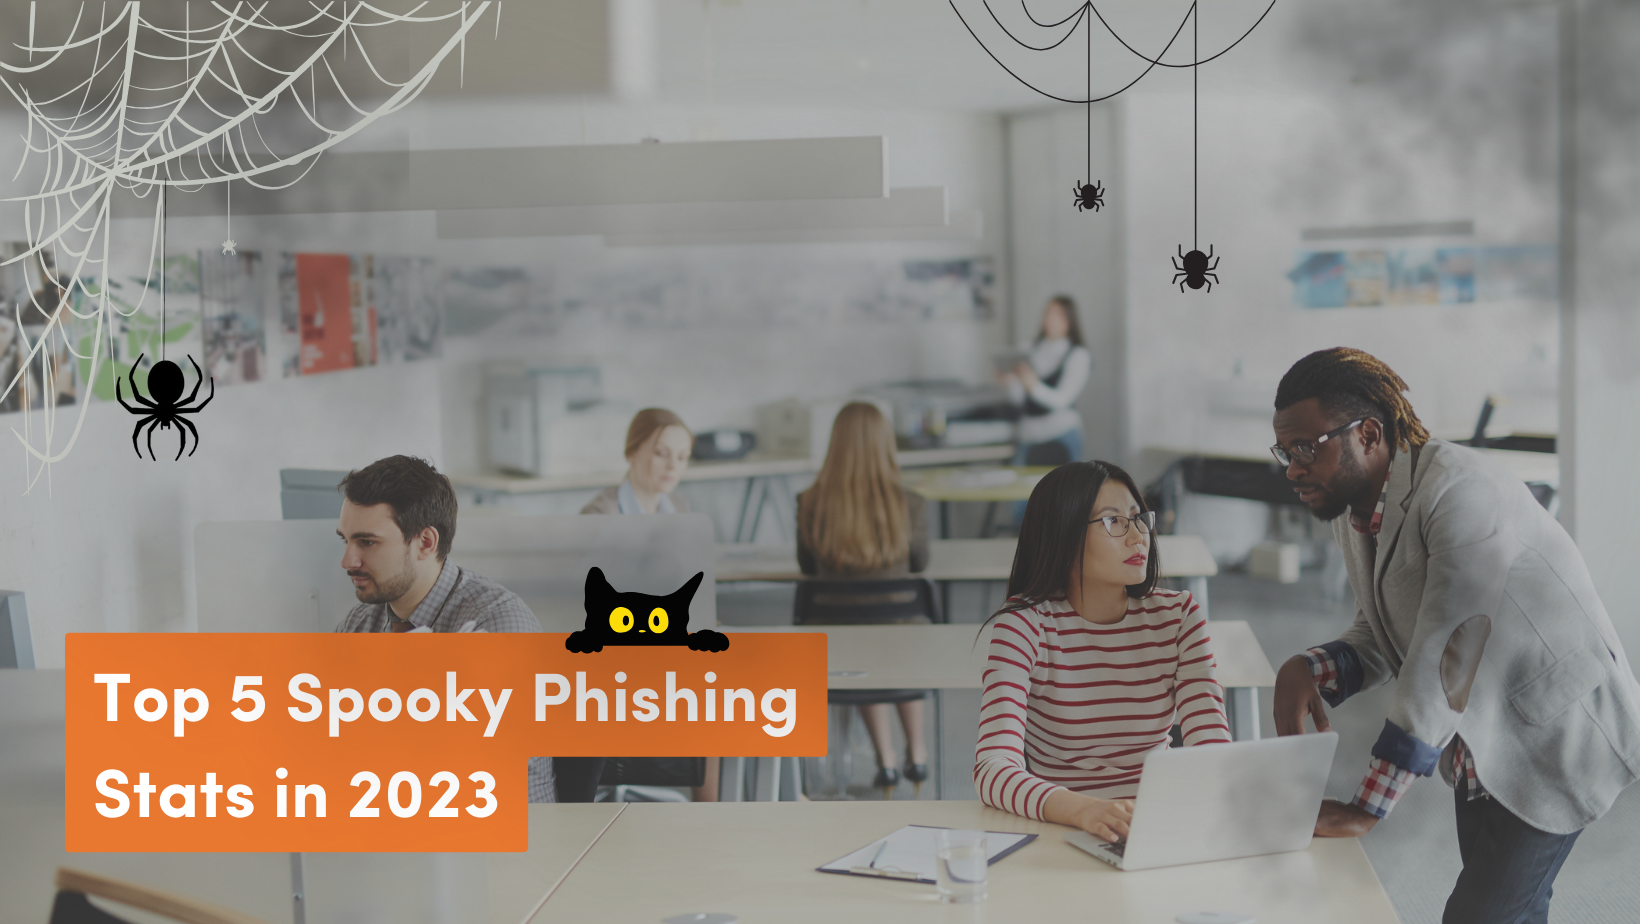 People in office working amidst phishing threats